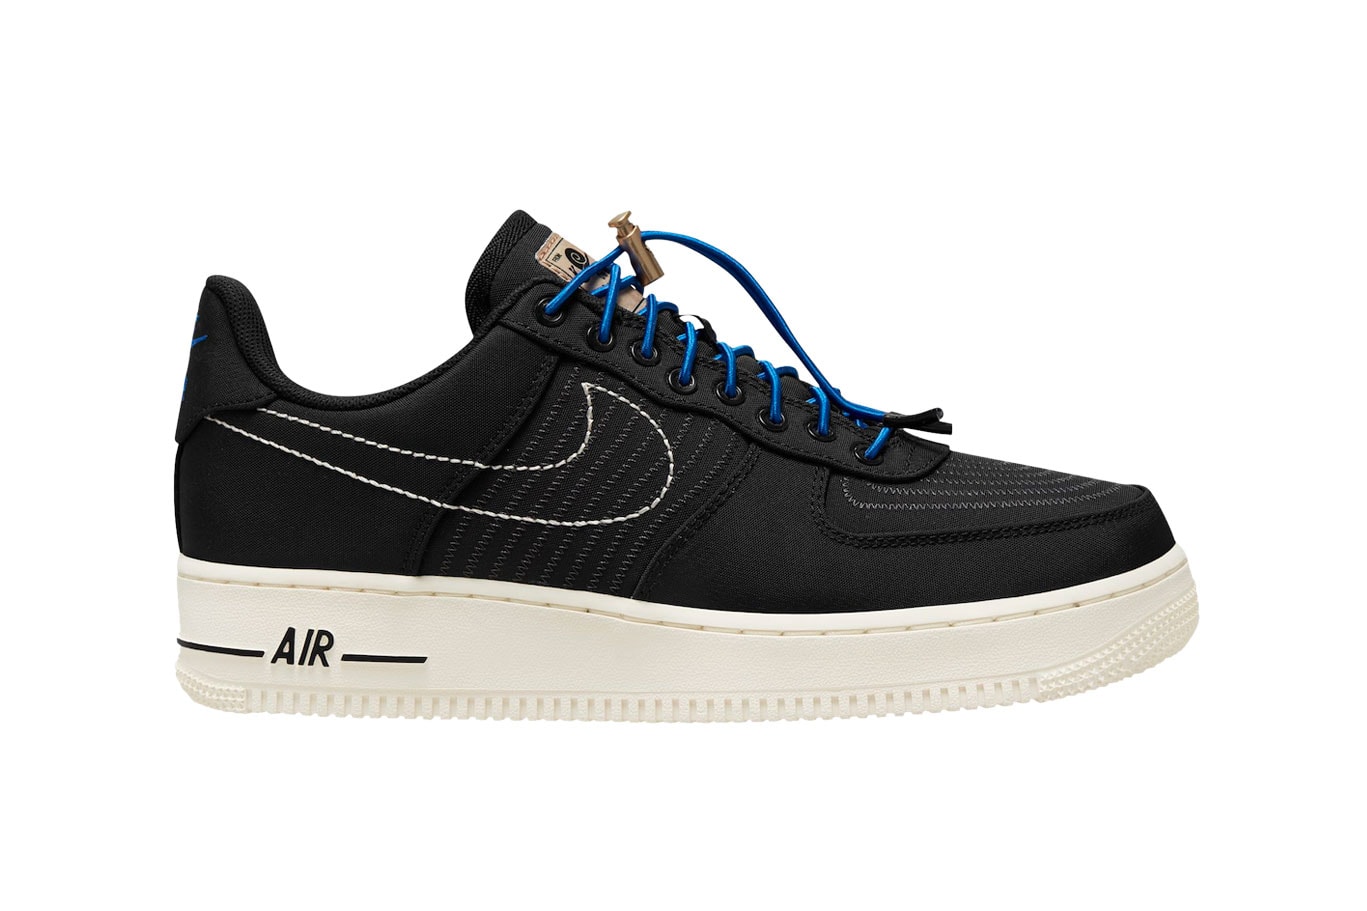 Nike Air Force 1 Moving Company Tom Sachs Nikecraft general purpose shoes blue toggle lace moving release info date price